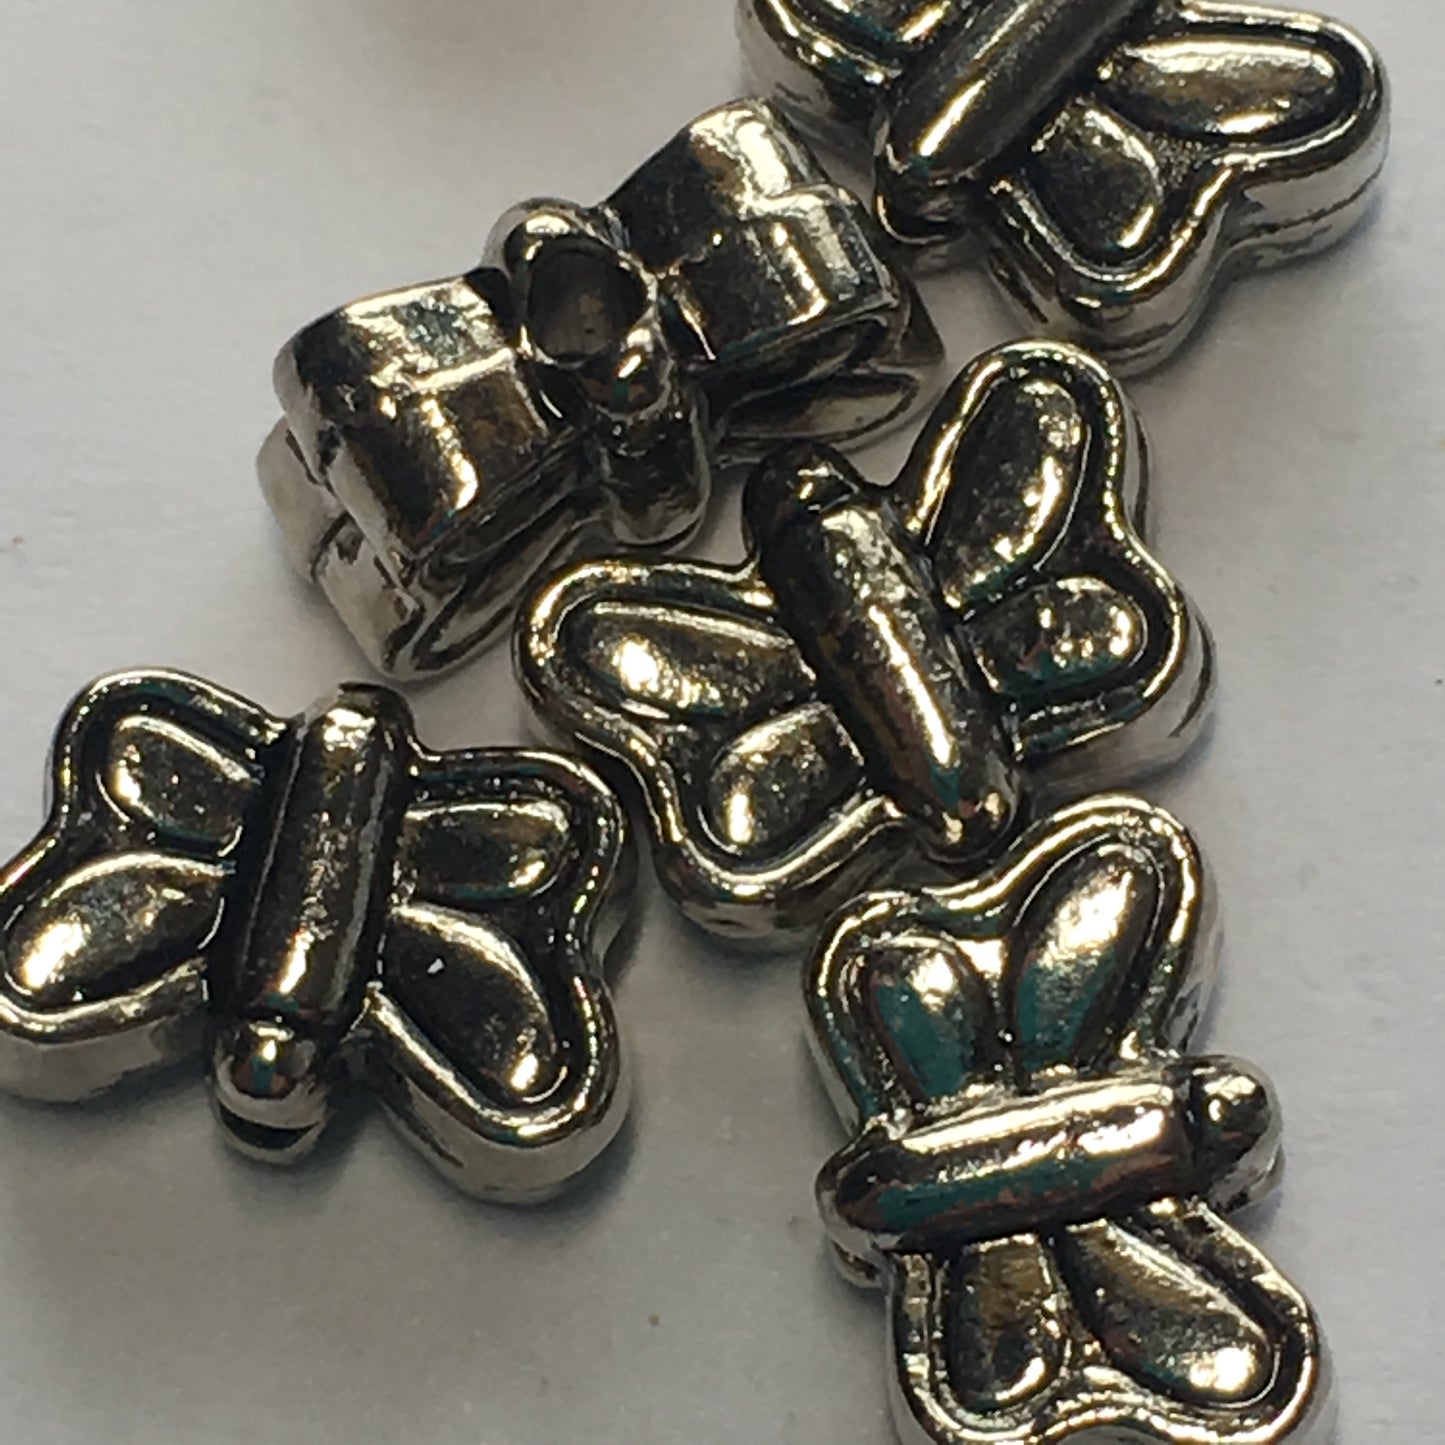 Antique Silver Butterfly Beads, 6 x 10 mm - 5 or 10 Beads